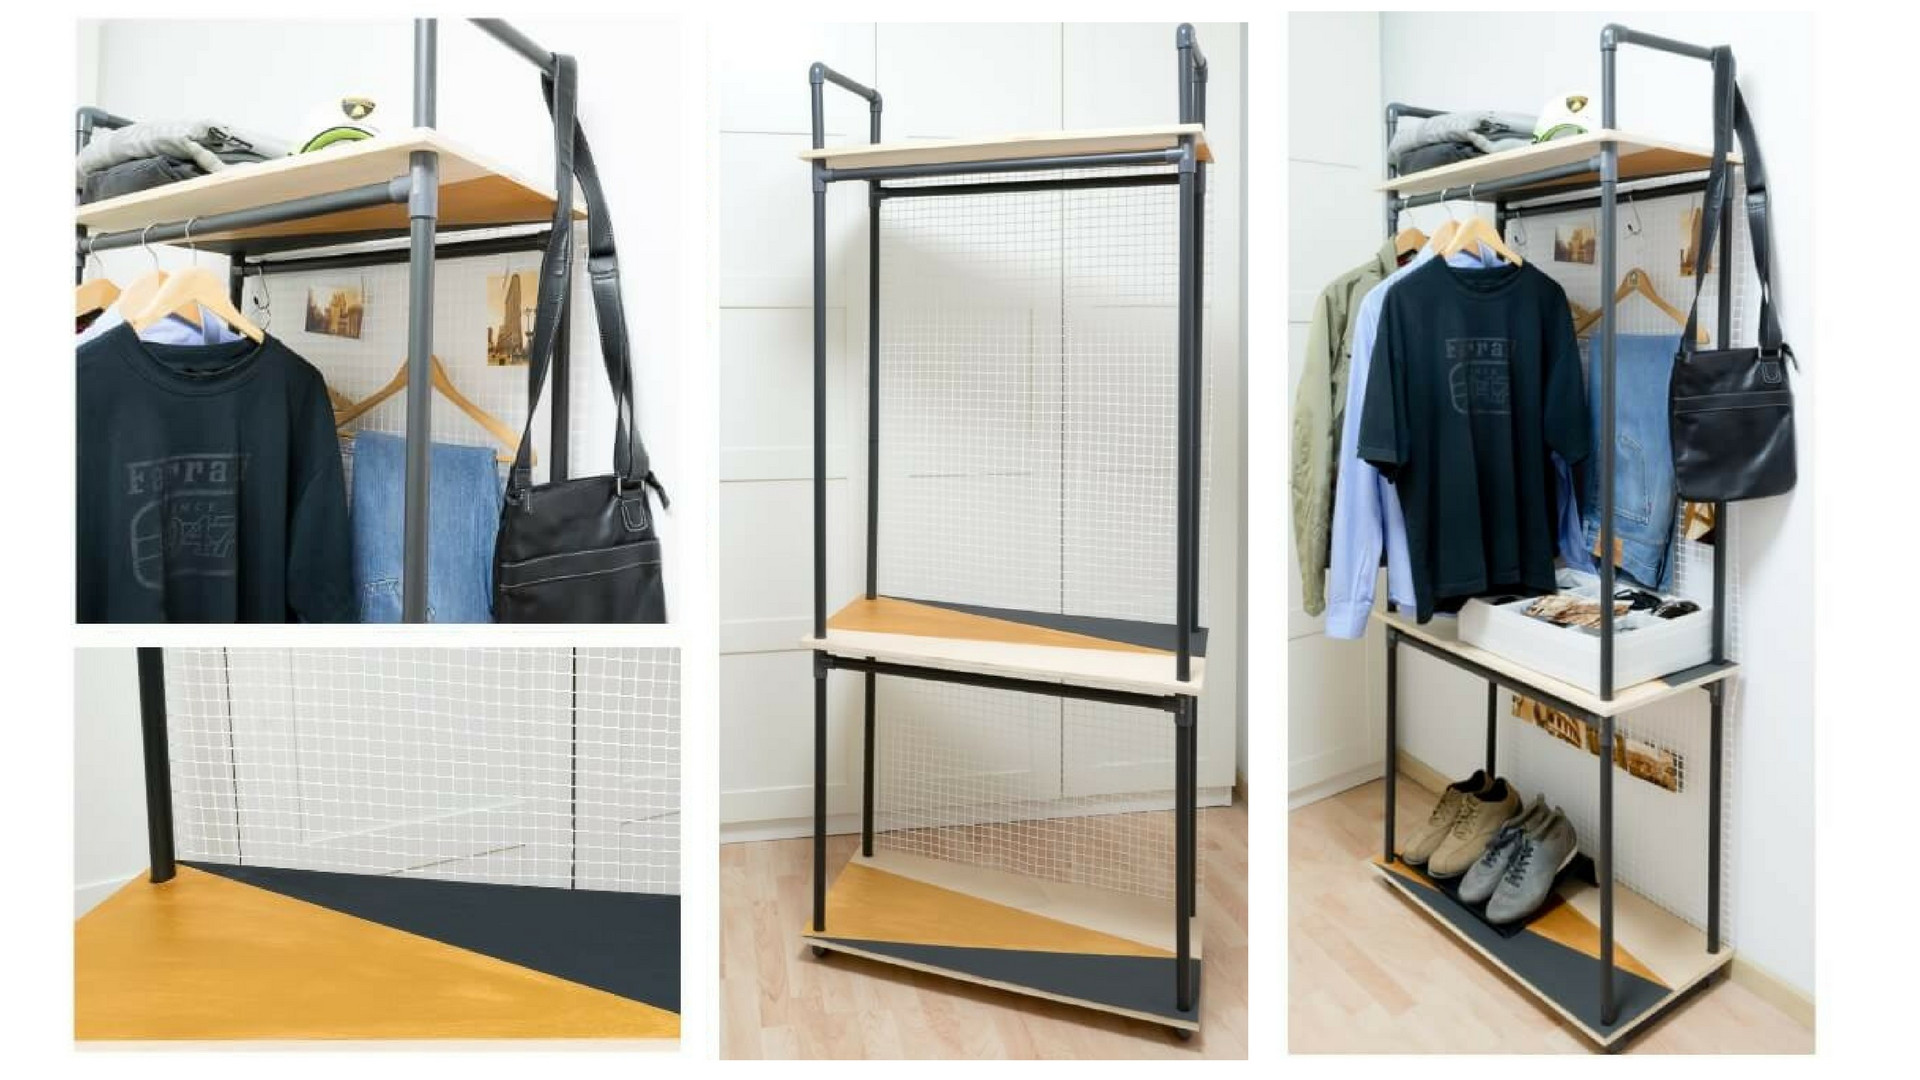 Pipe Clothes Rack DIY
 DIY PVC Pipe Clothes Rack The Handy Mano